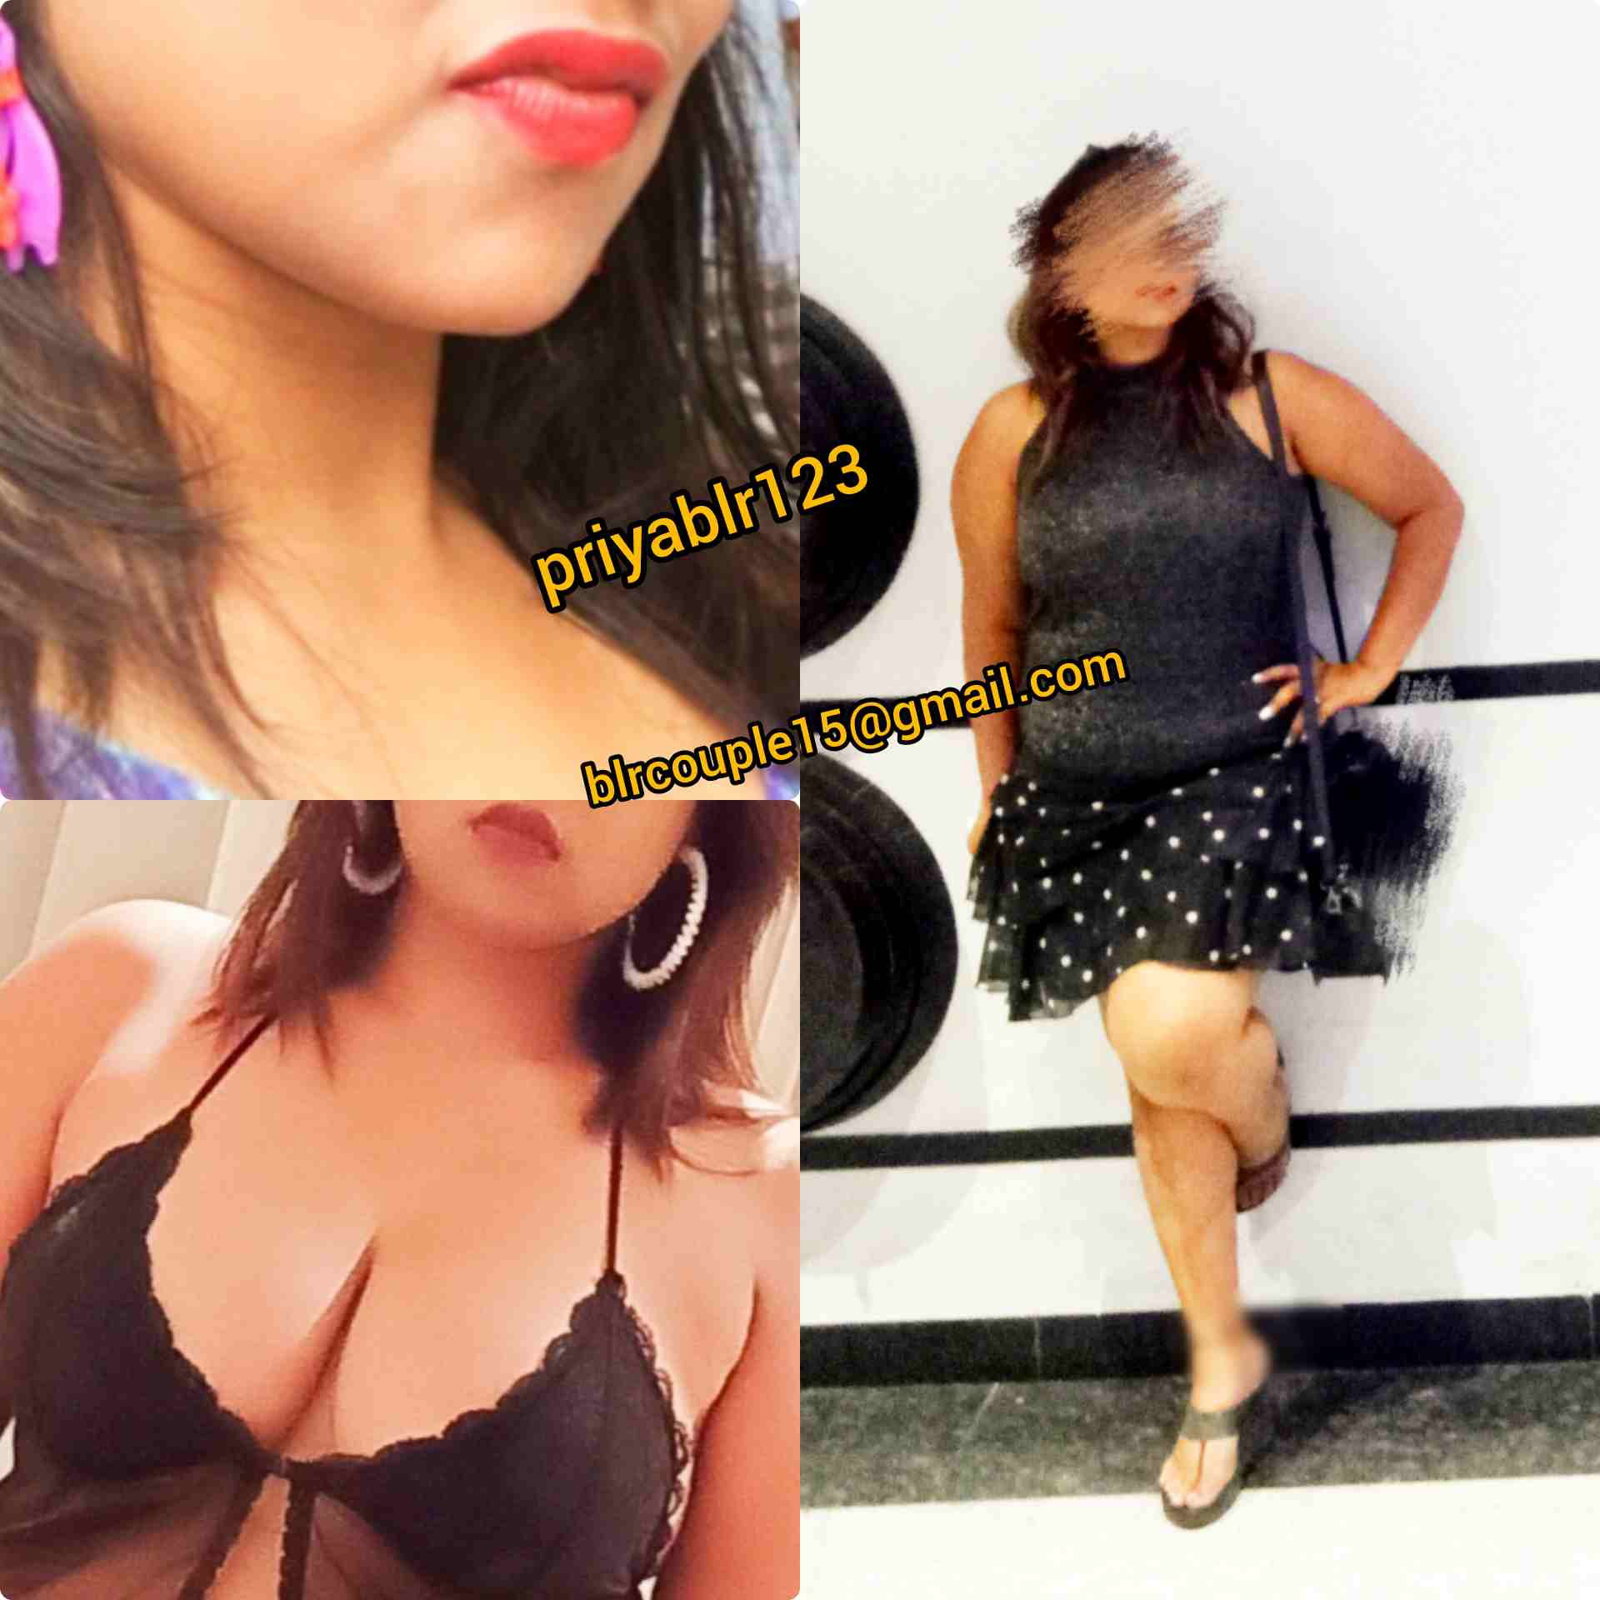 Shared Photo by priyablr123 with the username @priyablr123, who is a star user,  April 18, 2020 at 9:03 AM. The post is about the topic Share your sexy wife and the text says 'Dirty comments required.
Priya slutty cleavage, smoochable lips and sexy figure below for cumming!
Guys we r married Cpl from Bangalore India. She is an Elite Companion for alone meetings as well. Looking for decent males for fwb fun only.
Keep sharing..'